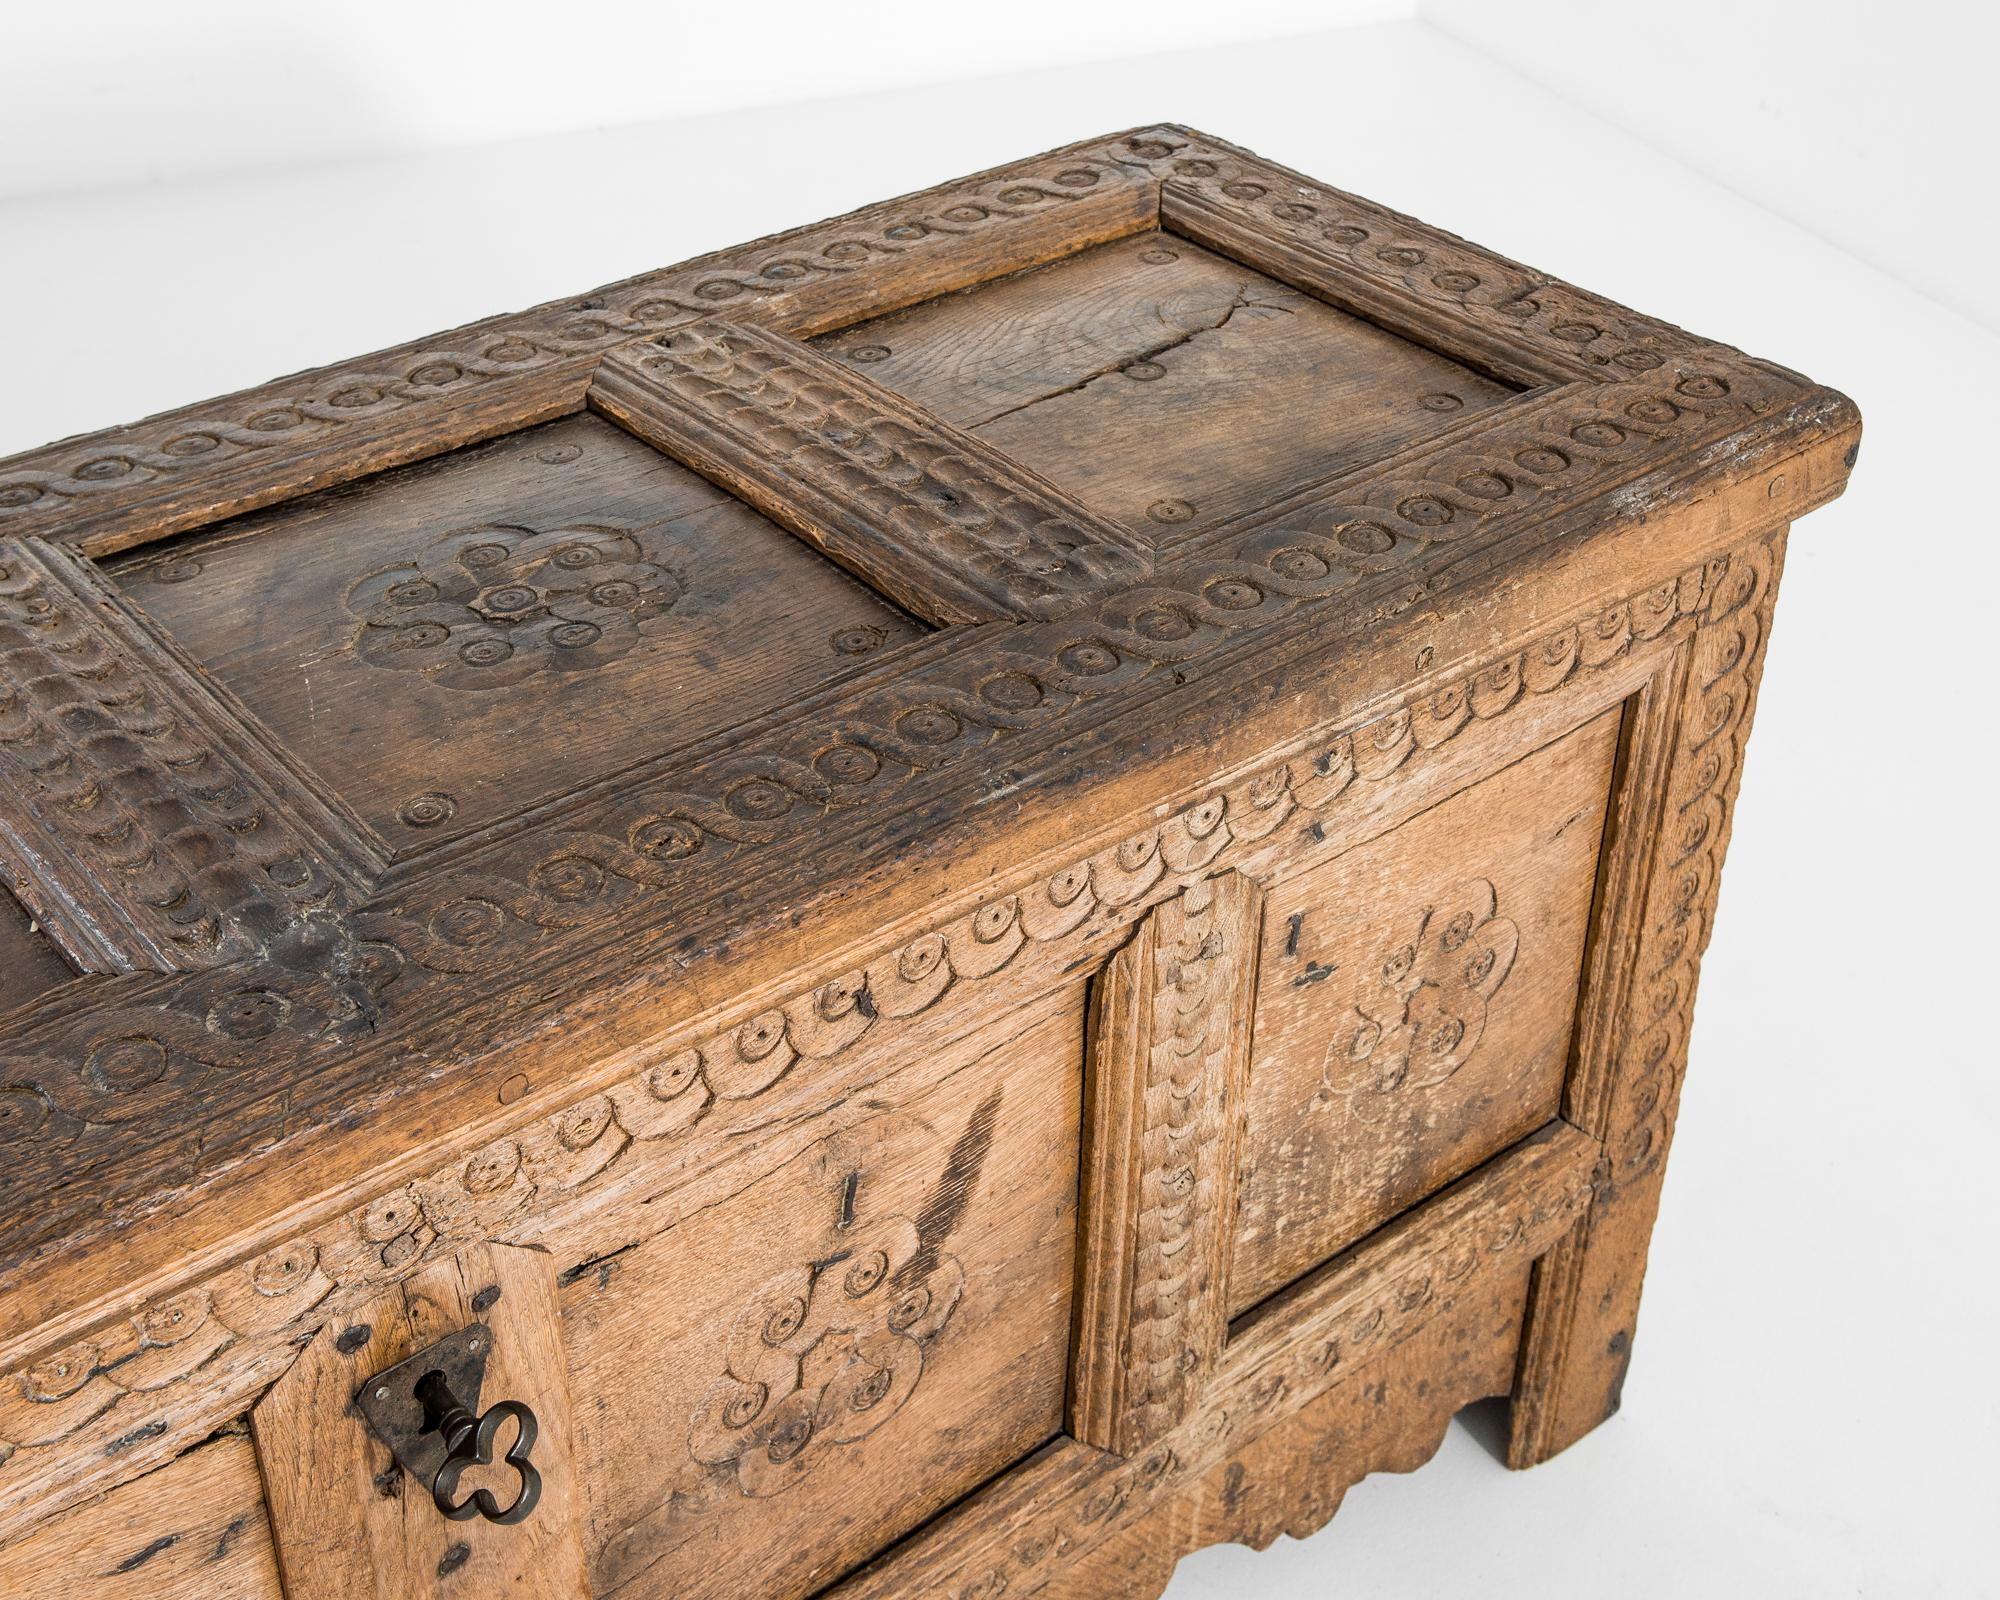 A provincial wooden trunk from 1800s Germany. The charming case is decorated with carved spiral patterns intertwined in a floral embrace. The chest is elevated, its feet complemented with an original scalloped apron that subtly contrasts with the